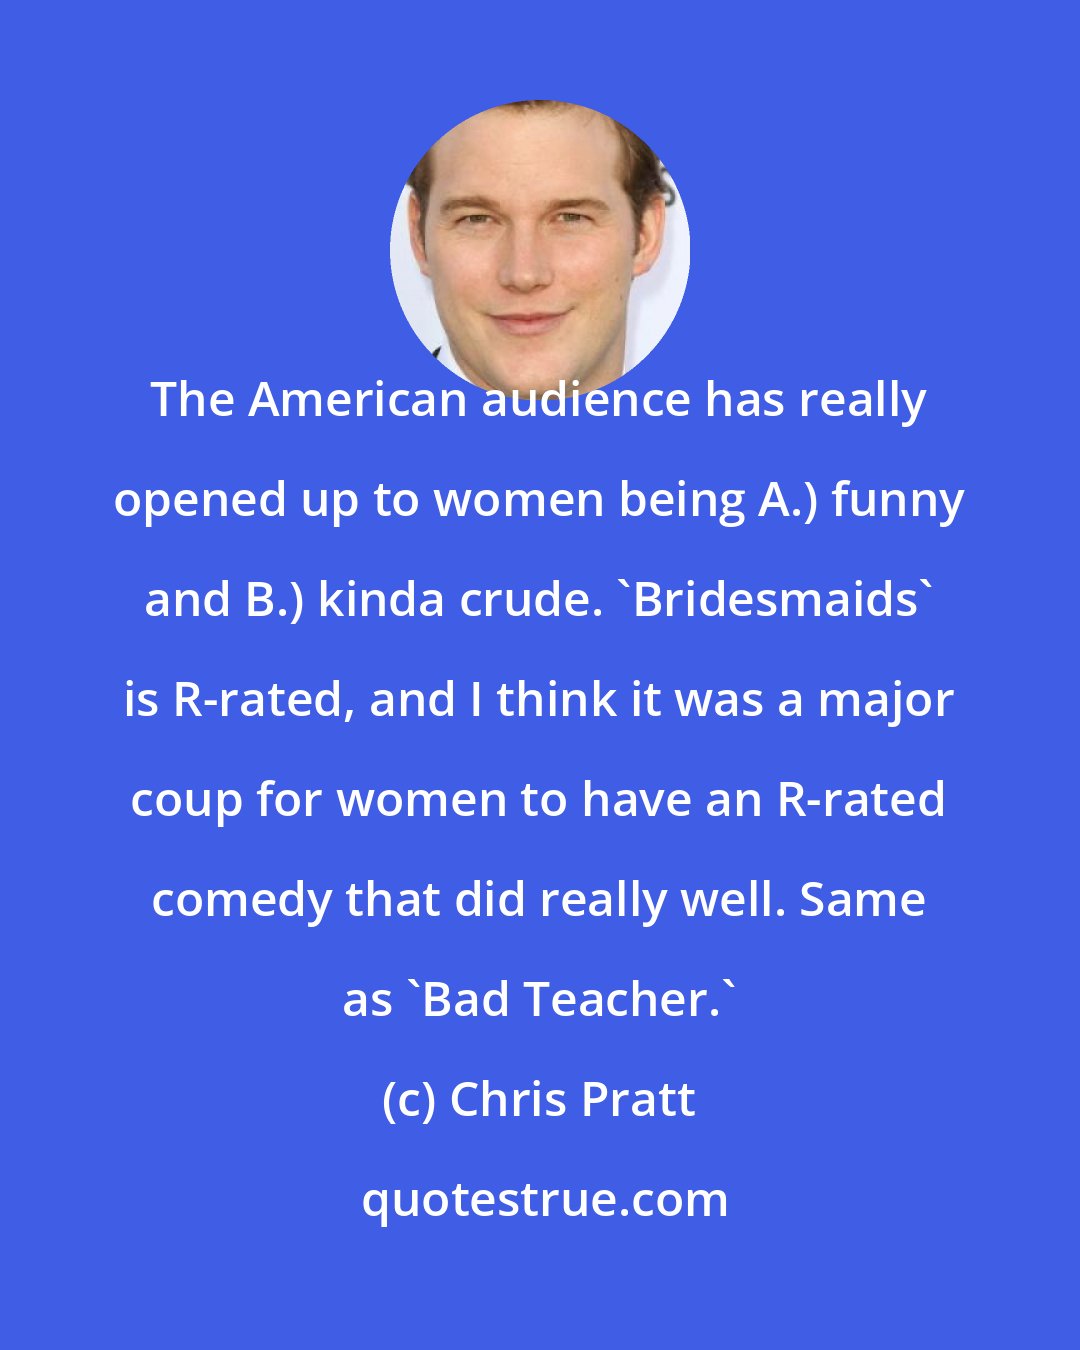 Chris Pratt: The American audience has really opened up to women being A.) funny and B.) kinda crude. 'Bridesmaids' is R-rated, and I think it was a major coup for women to have an R-rated comedy that did really well. Same as 'Bad Teacher.'